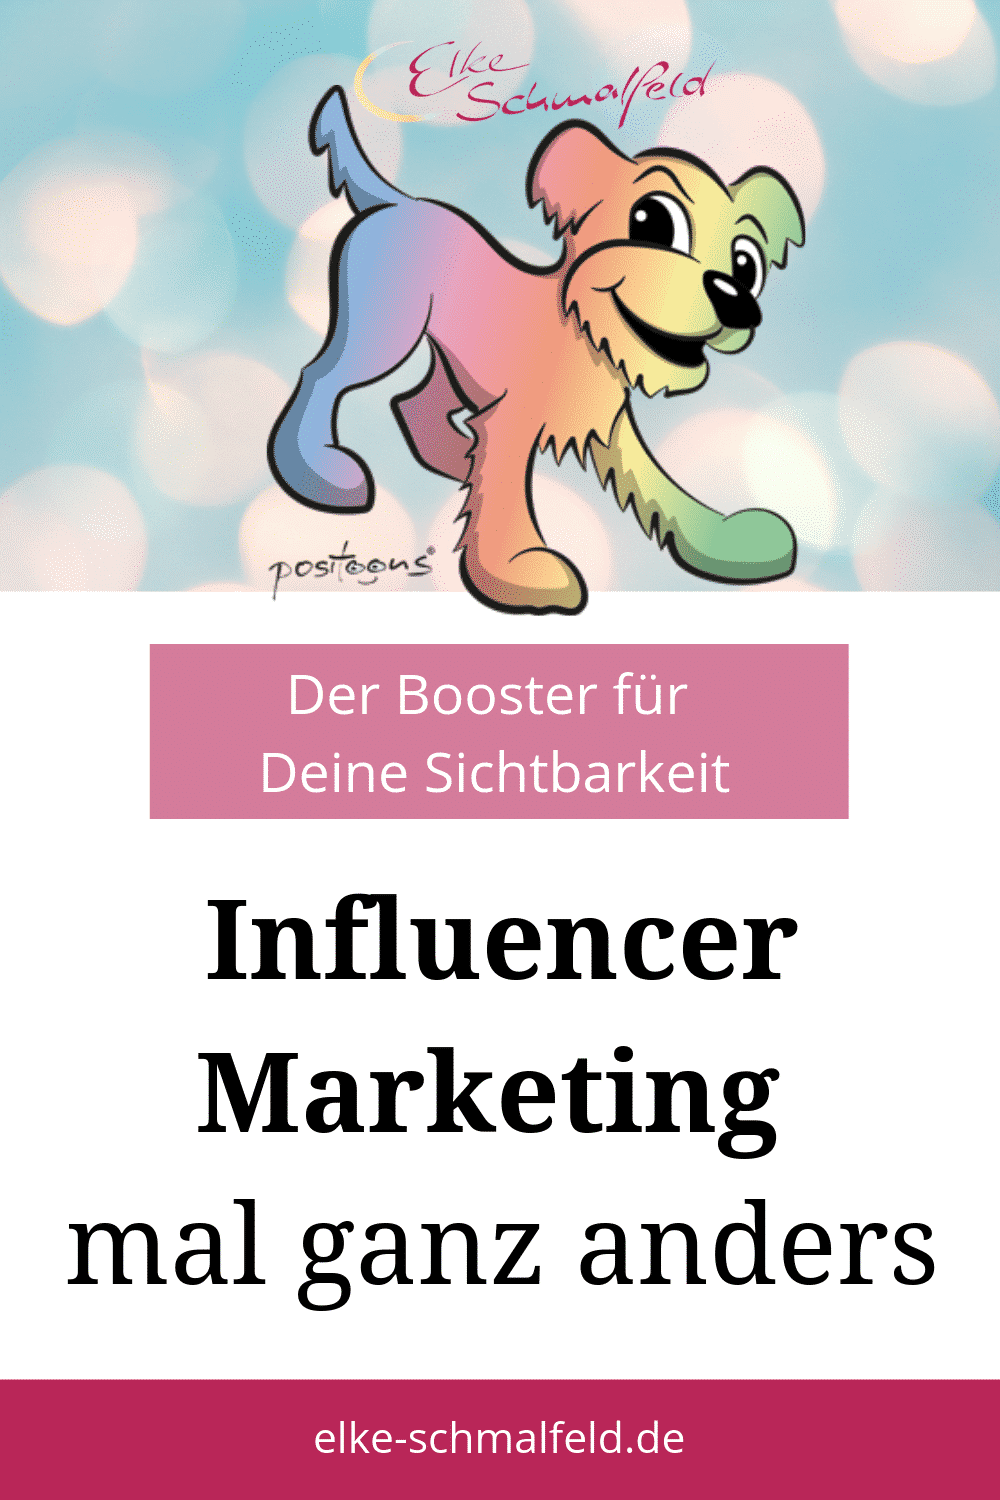 Influencer Marketing anders gedacht